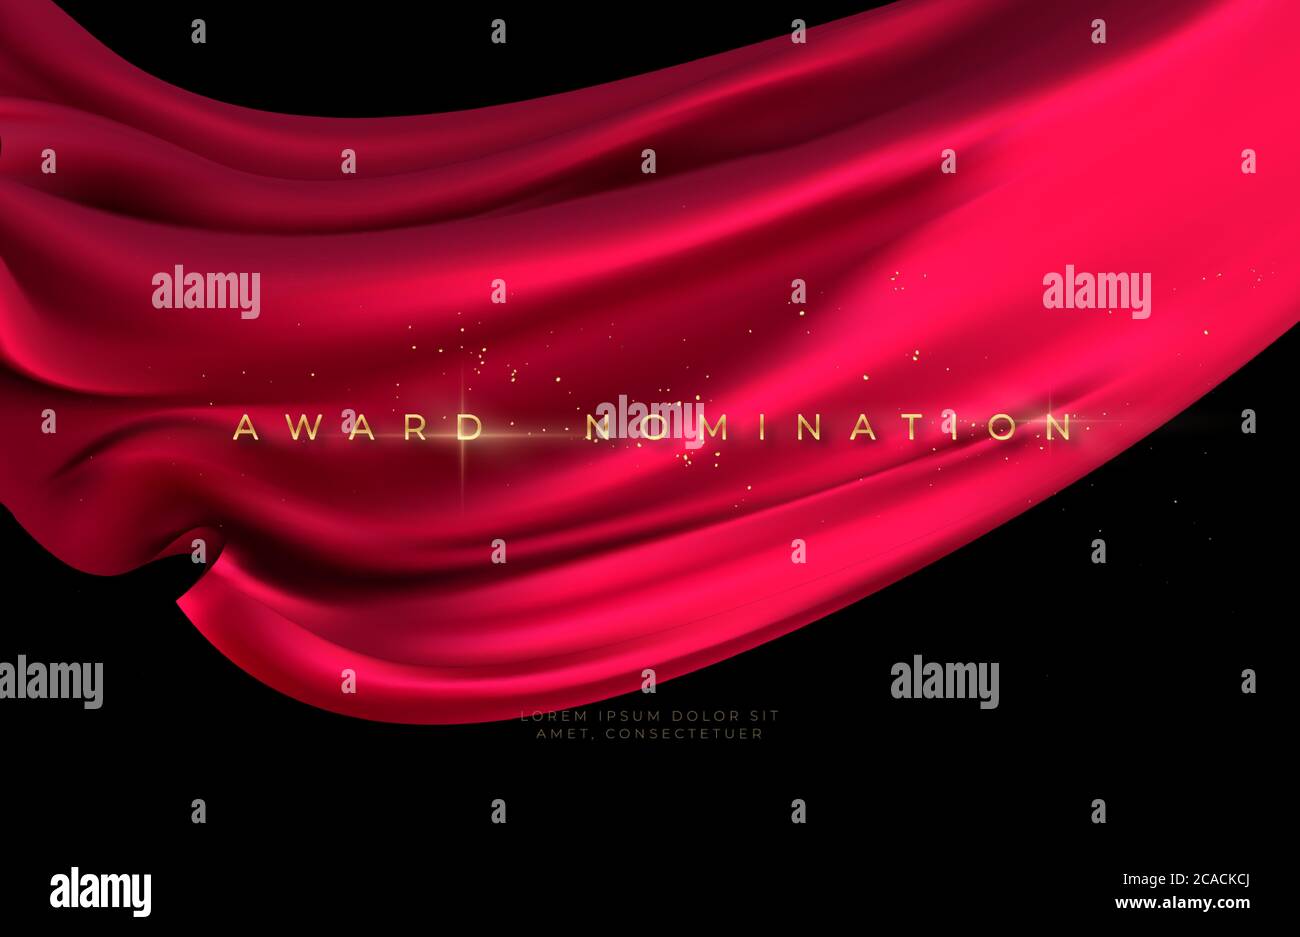 Award nomination ceremony with luxurious red flying silk wavy background with gold glitter and sparkle. Vector illustration Stock Vector